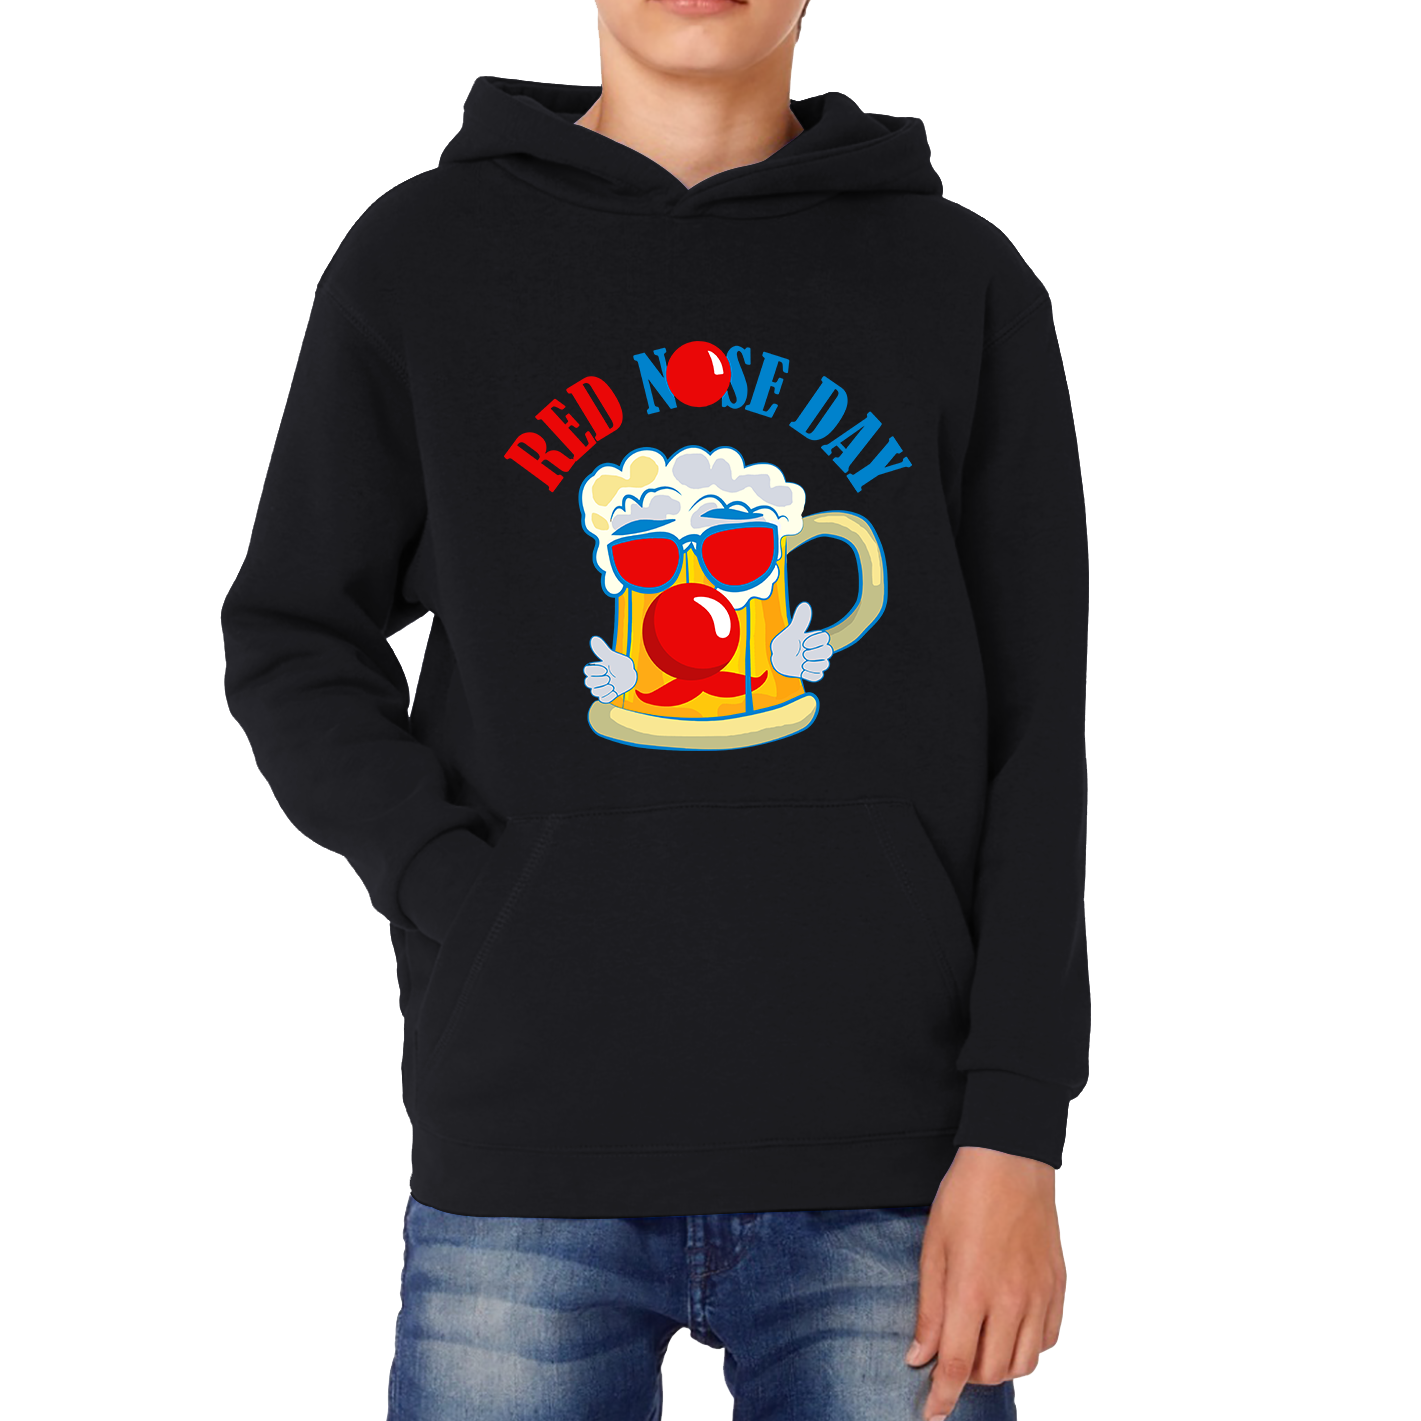 Beer Red Nose Day Funny Kids Hoodie. 50% Goes To Charity